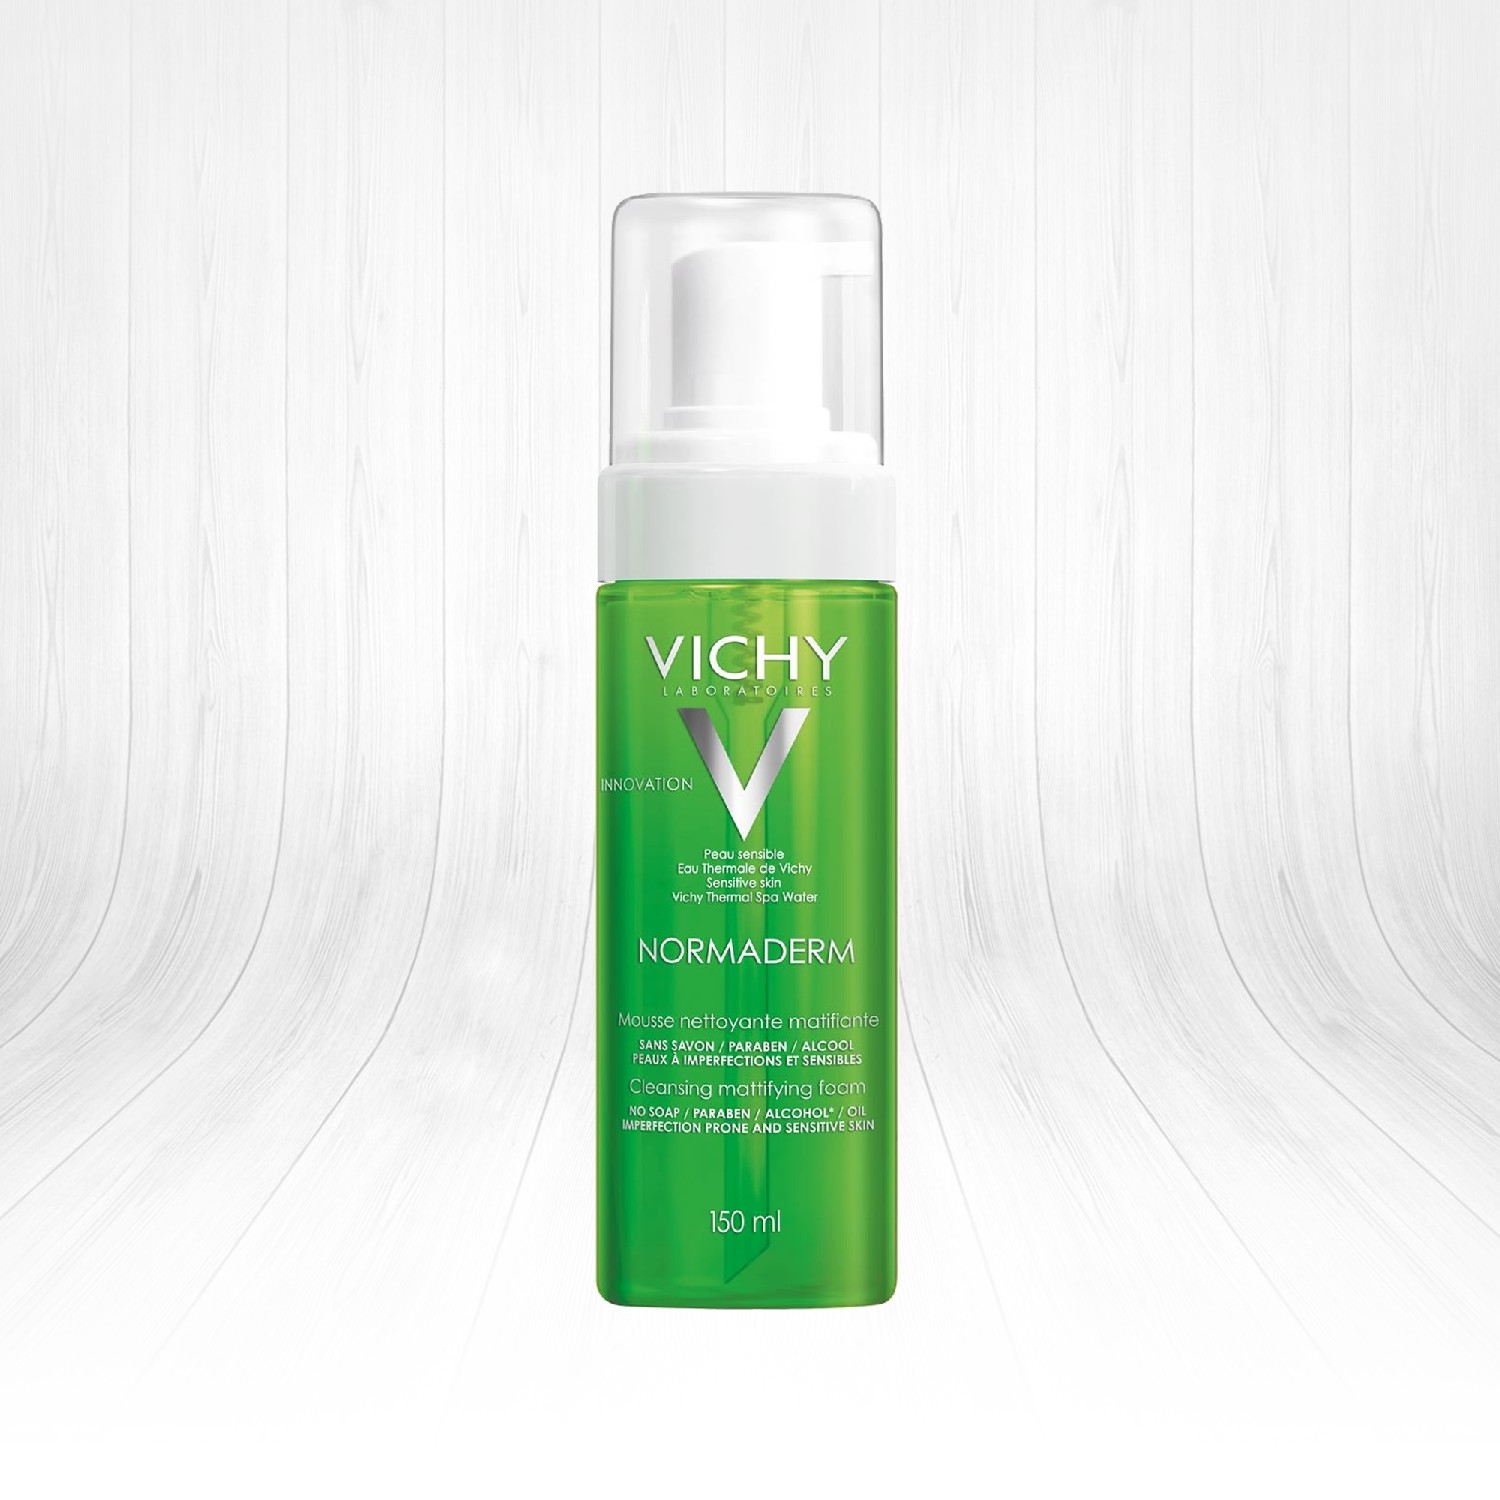 Vichy Normaderm Mousse Nettoyante